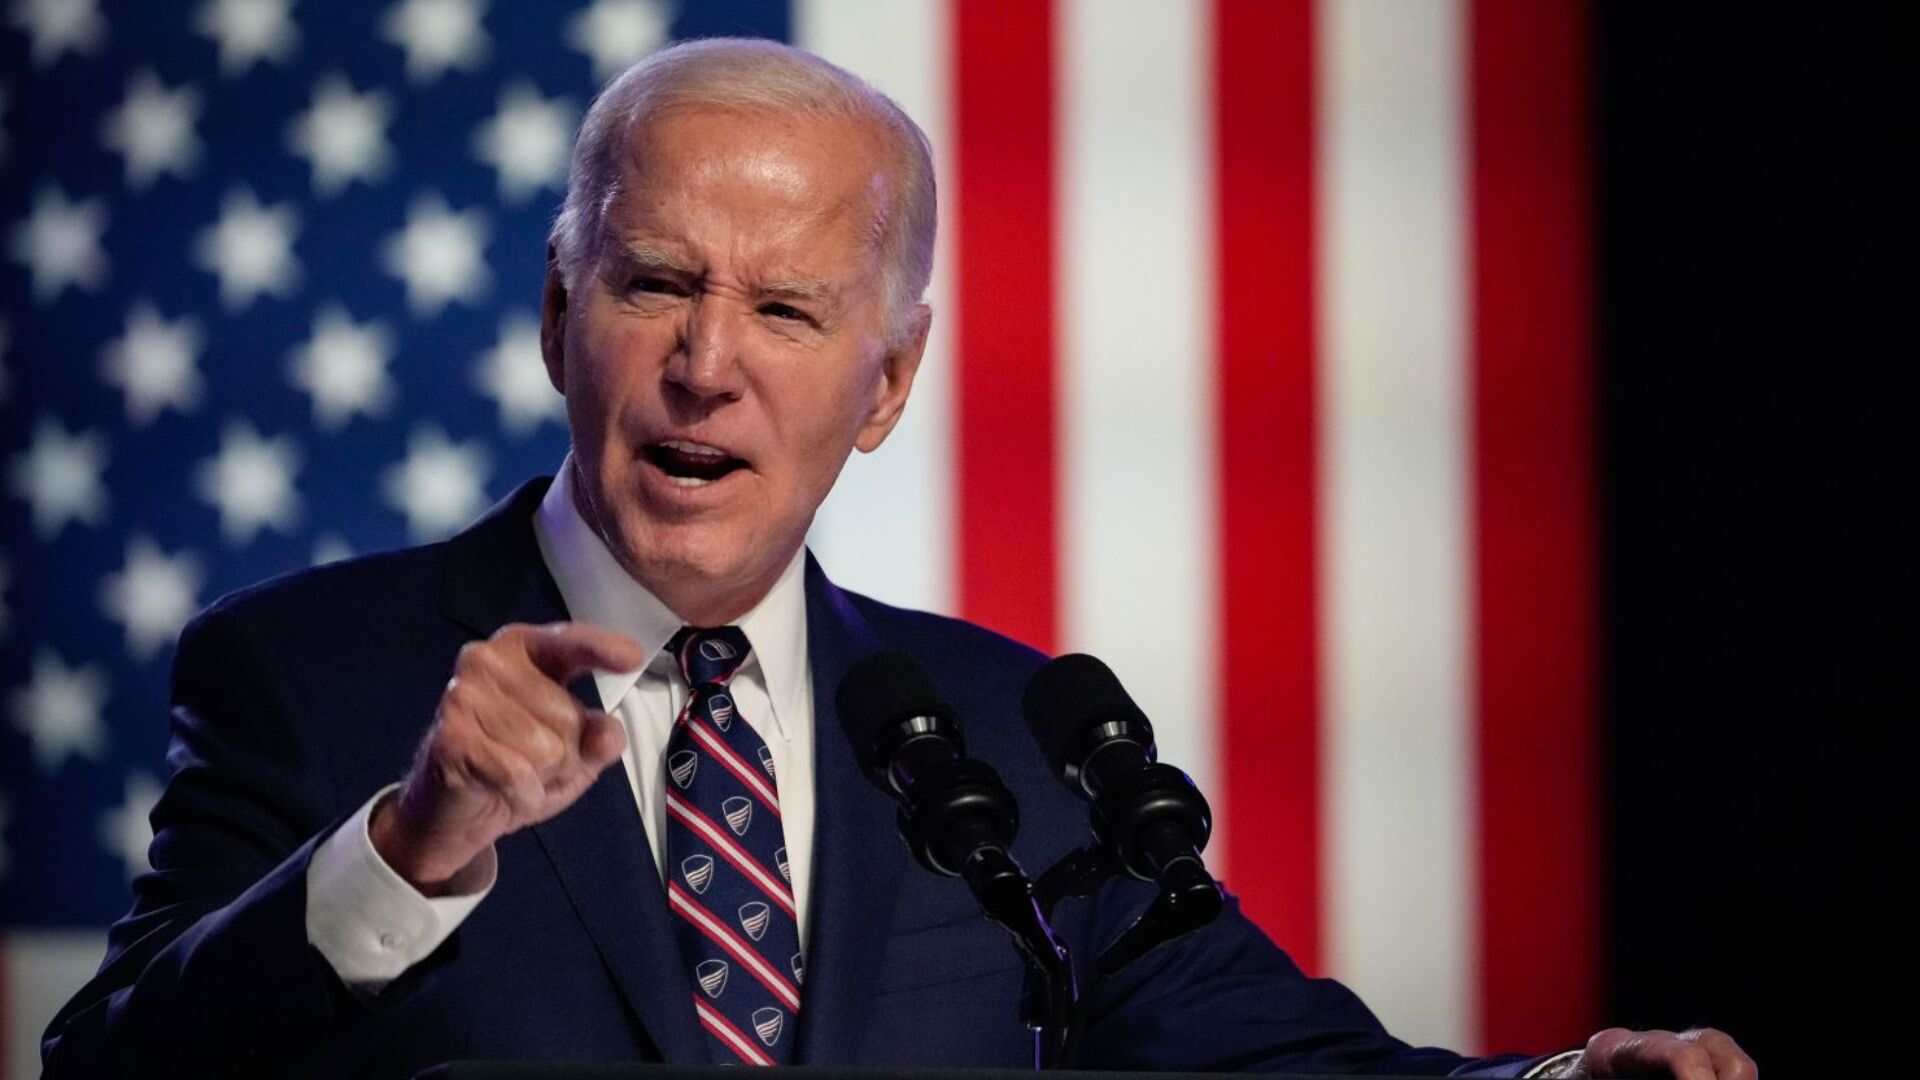 Biden Calls JD Vance “Clone Of Trump On Policy Issues”